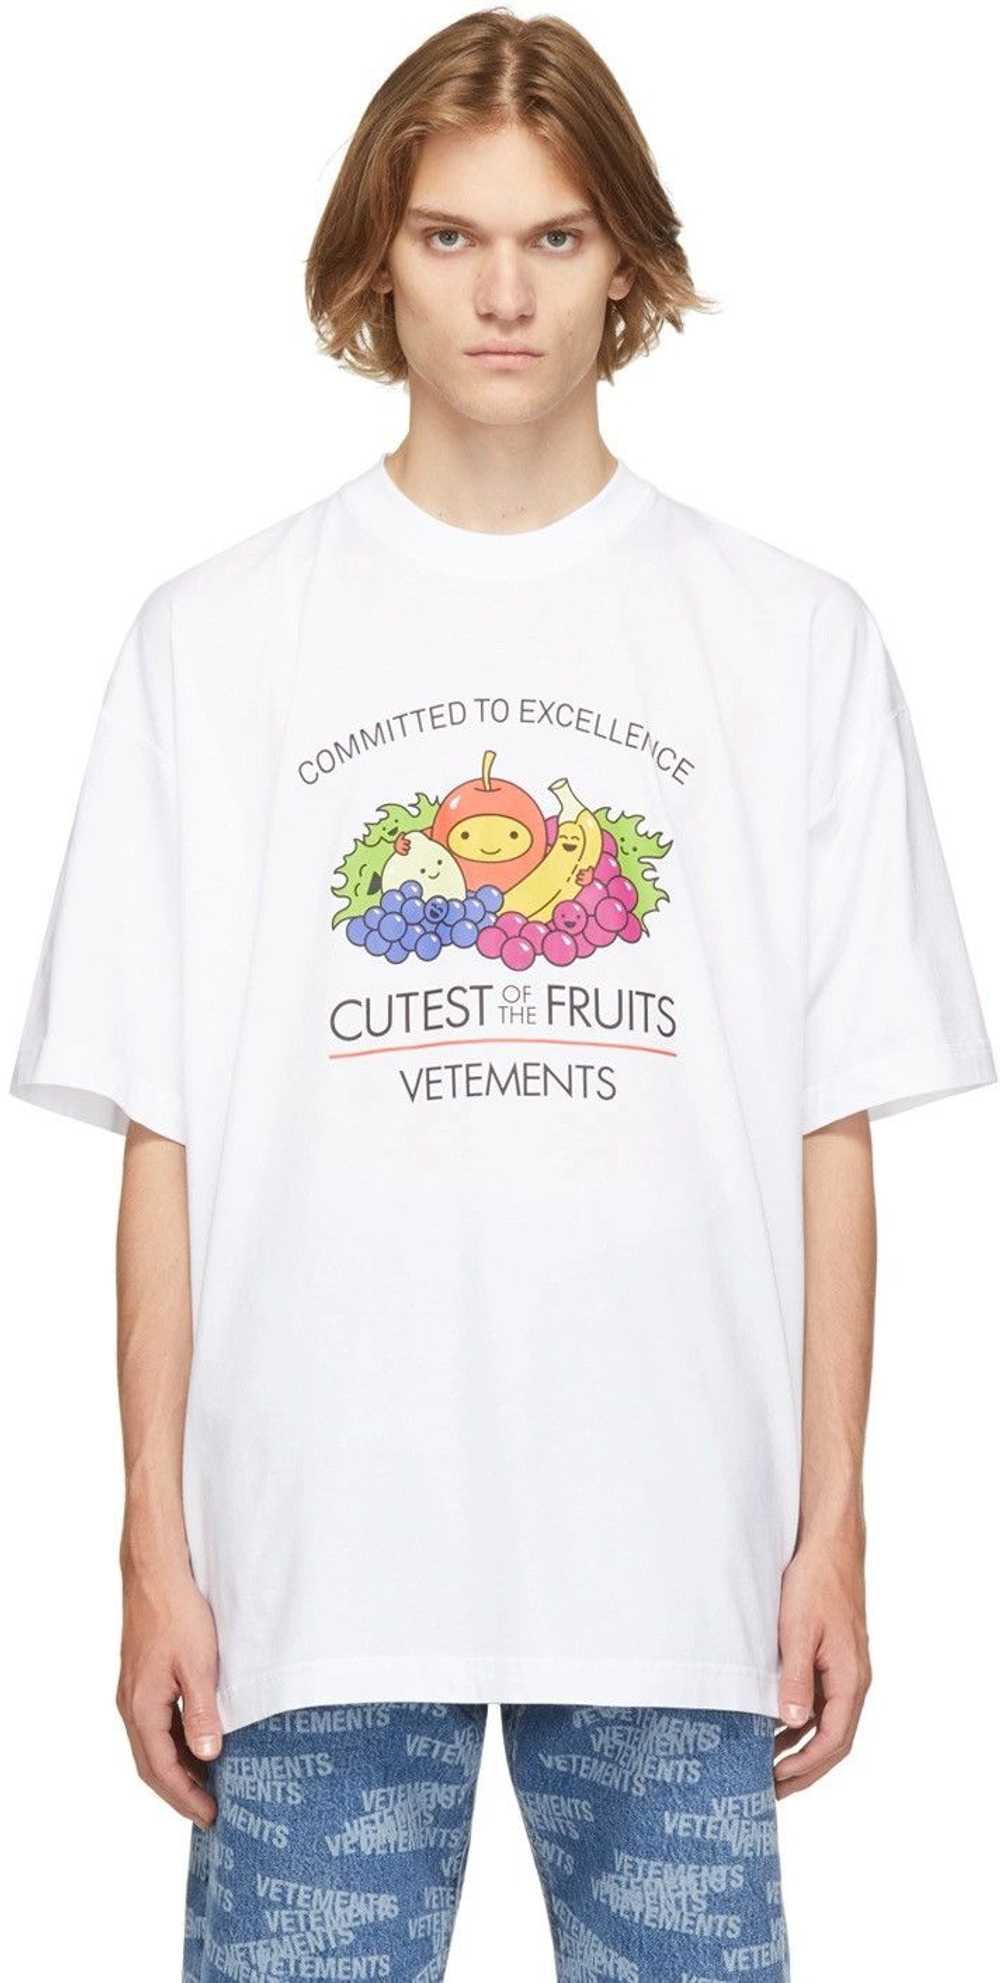 Vetements Vetements “Cutest of the Fruits” Oversi… - image 10